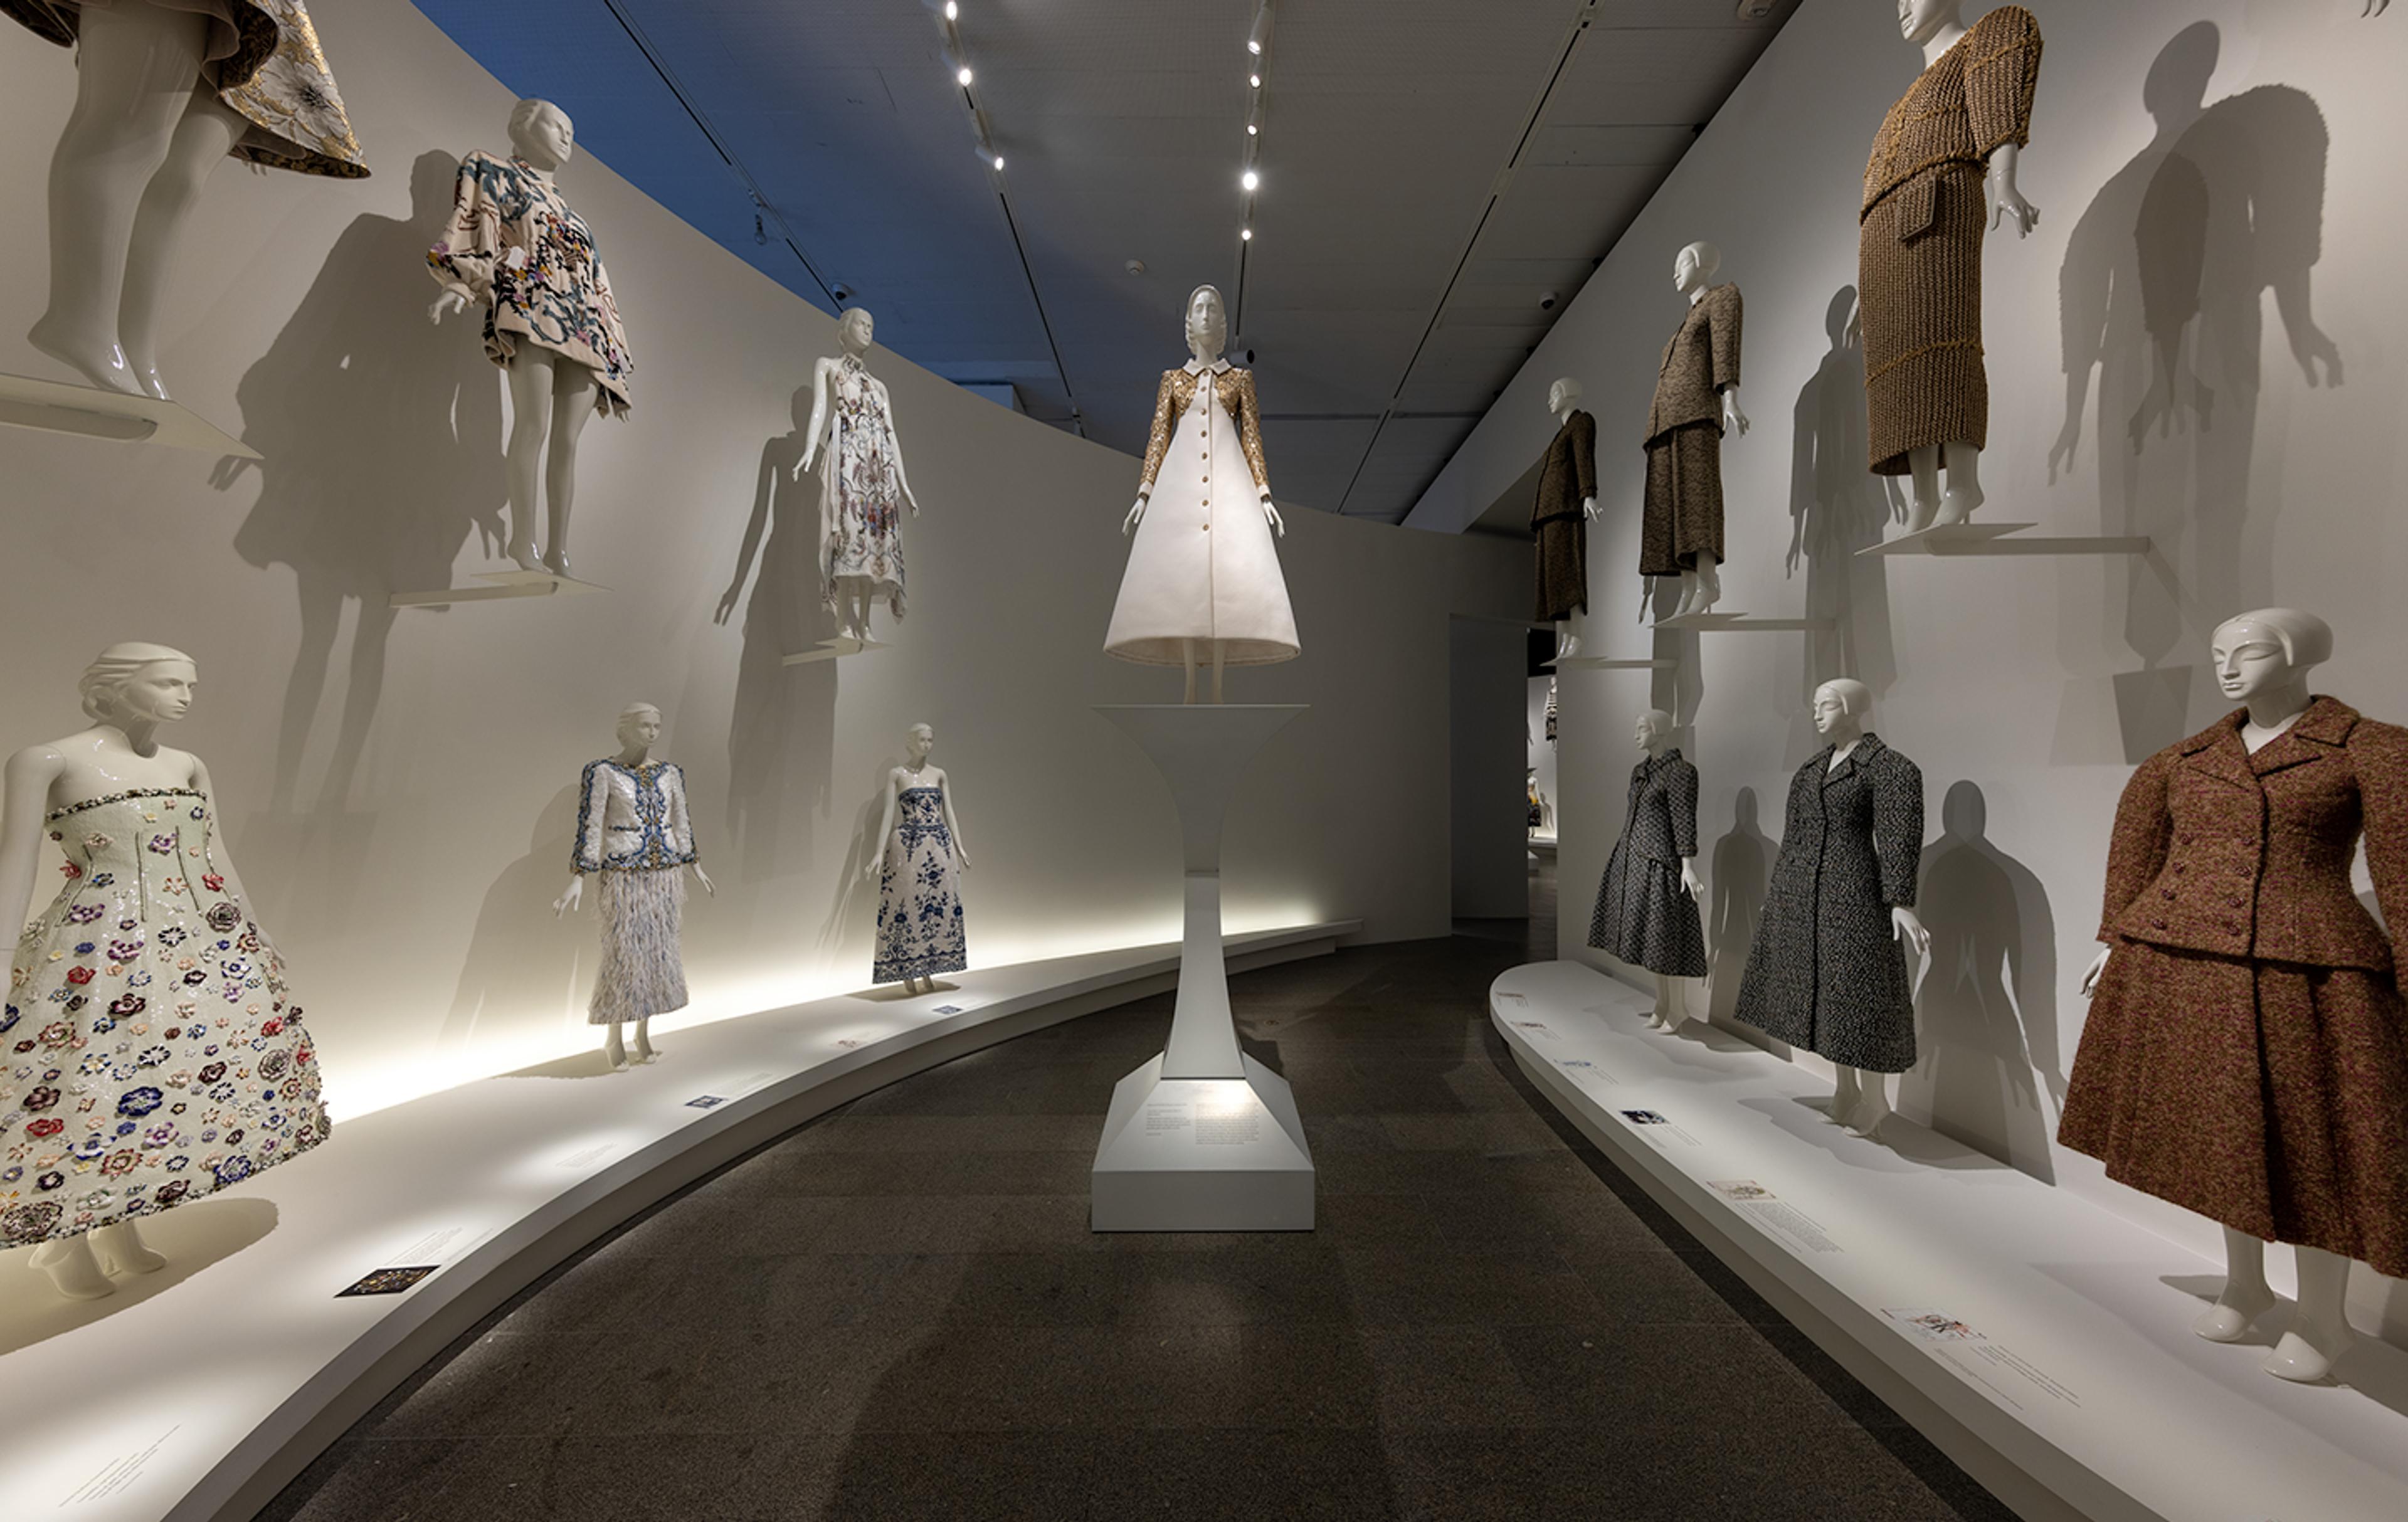 Two delicate Exhibitions about Fashion and Art Nouveau